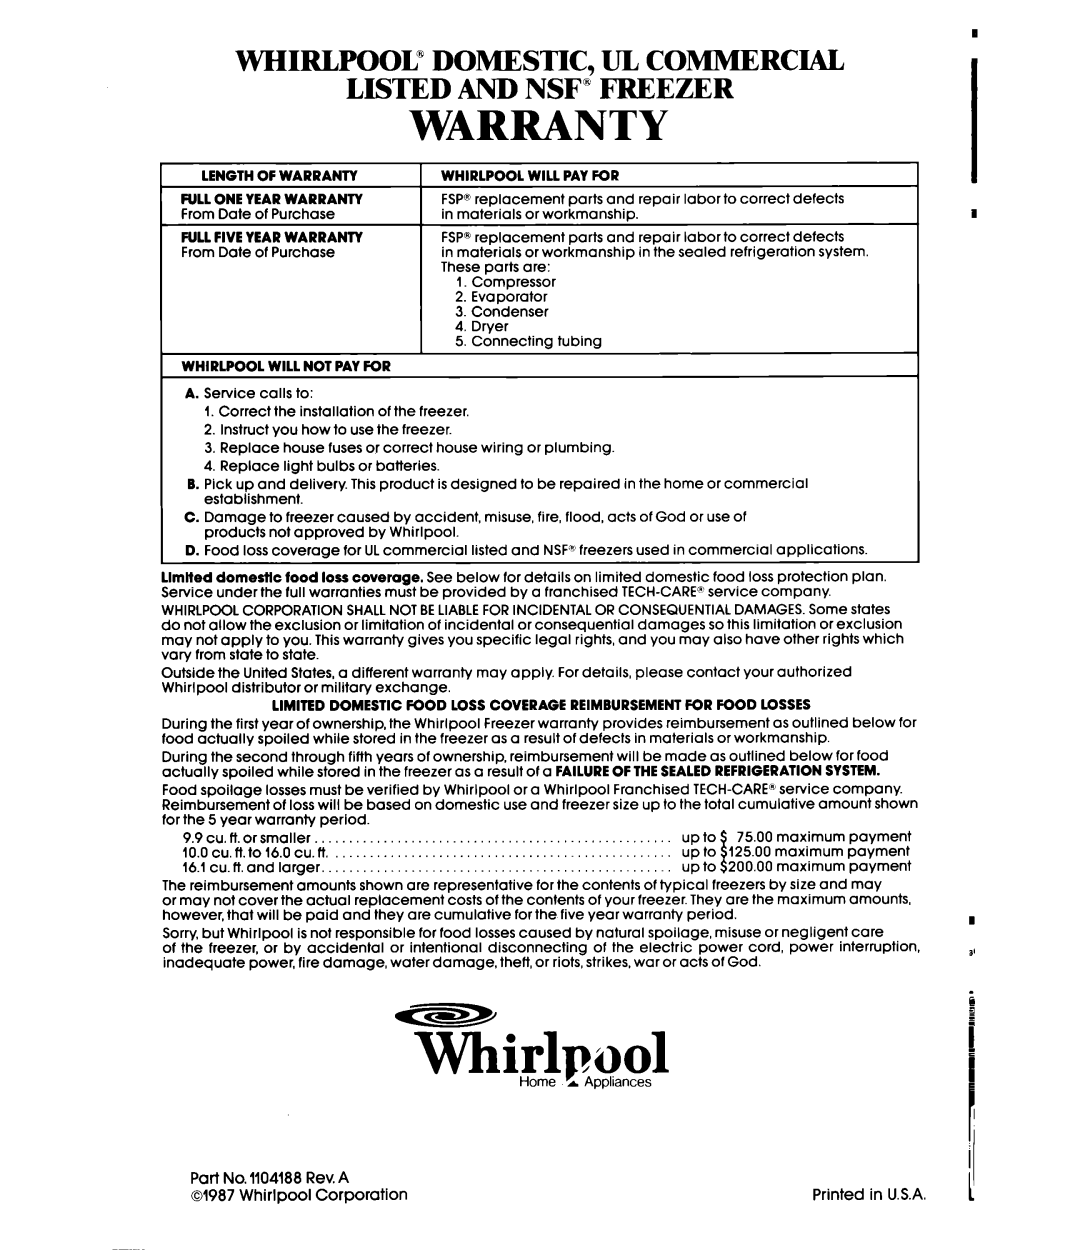 Whirlpool EV150N manual TF&wol, Warranty, Whirlpool” Domestic, Ul Commercial, Listed And Nsf” Freezer 